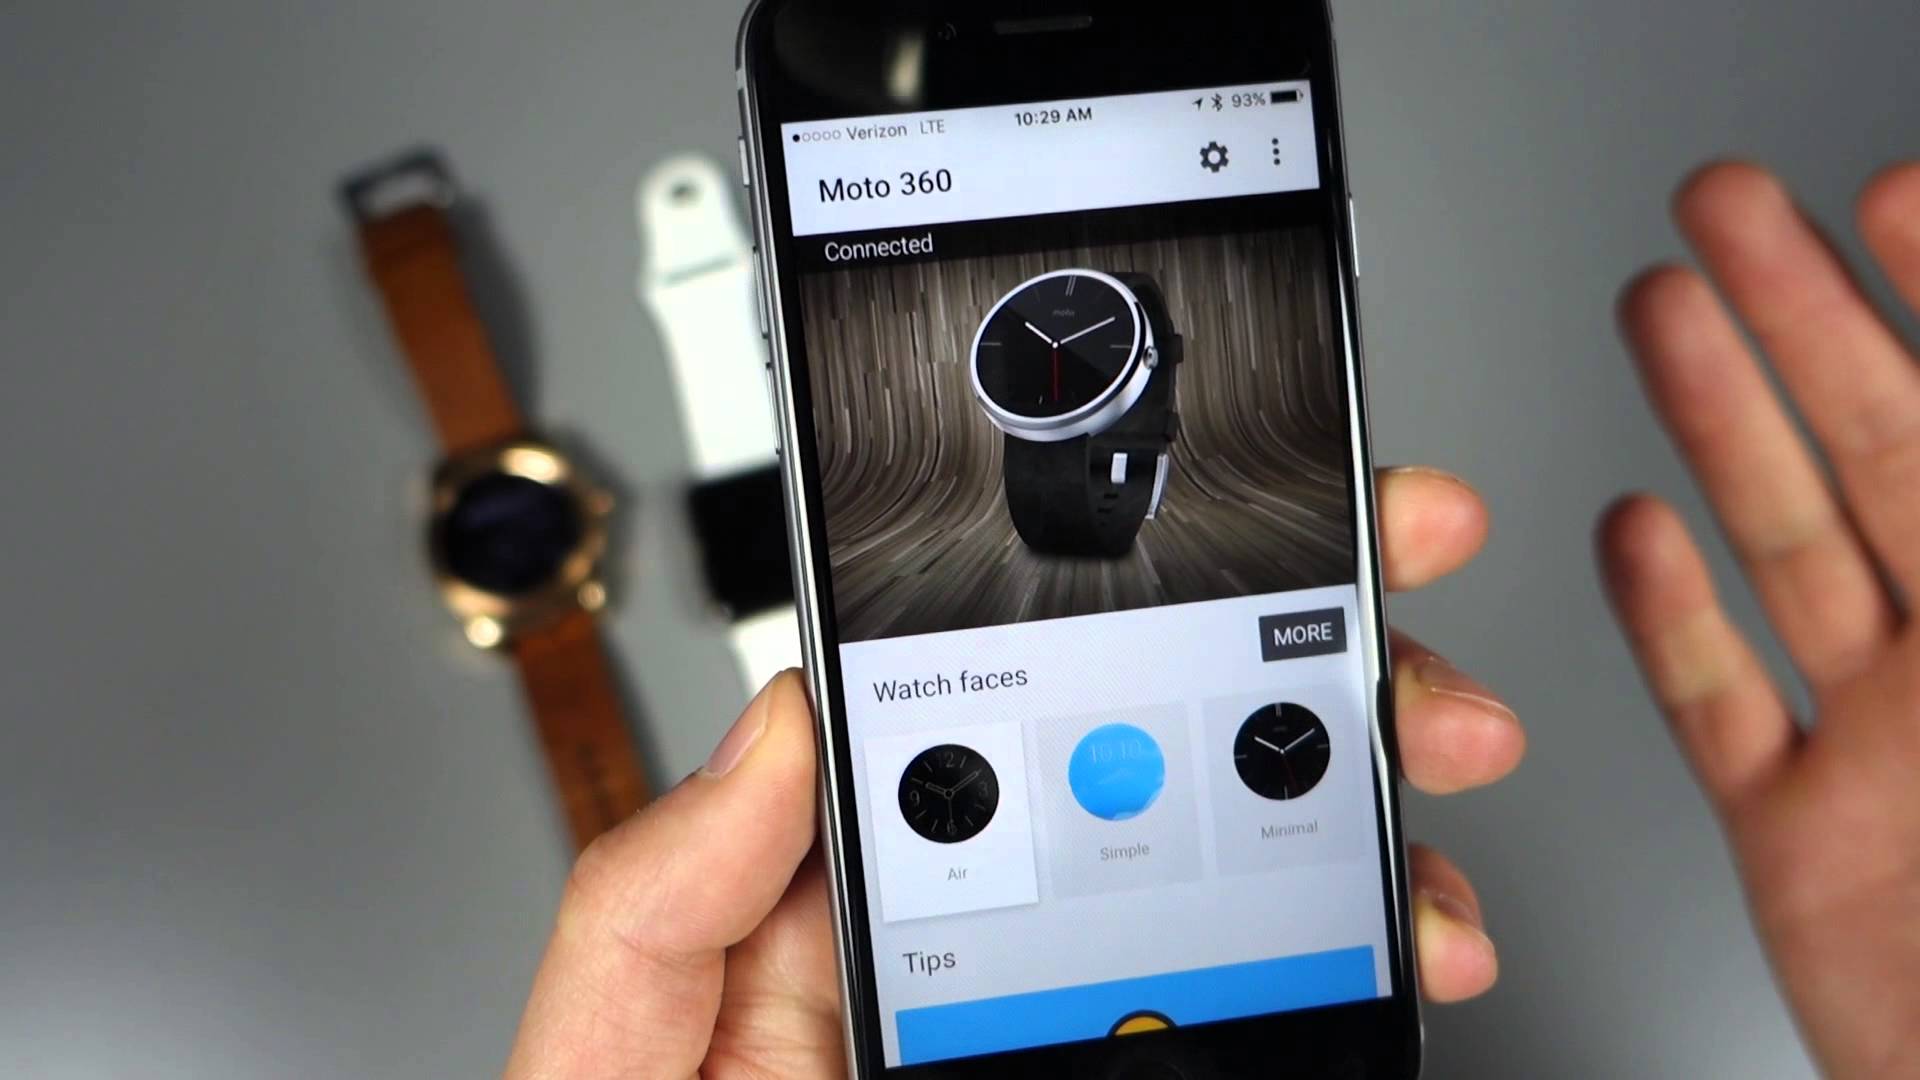 Video: Using Android Wear on iOS